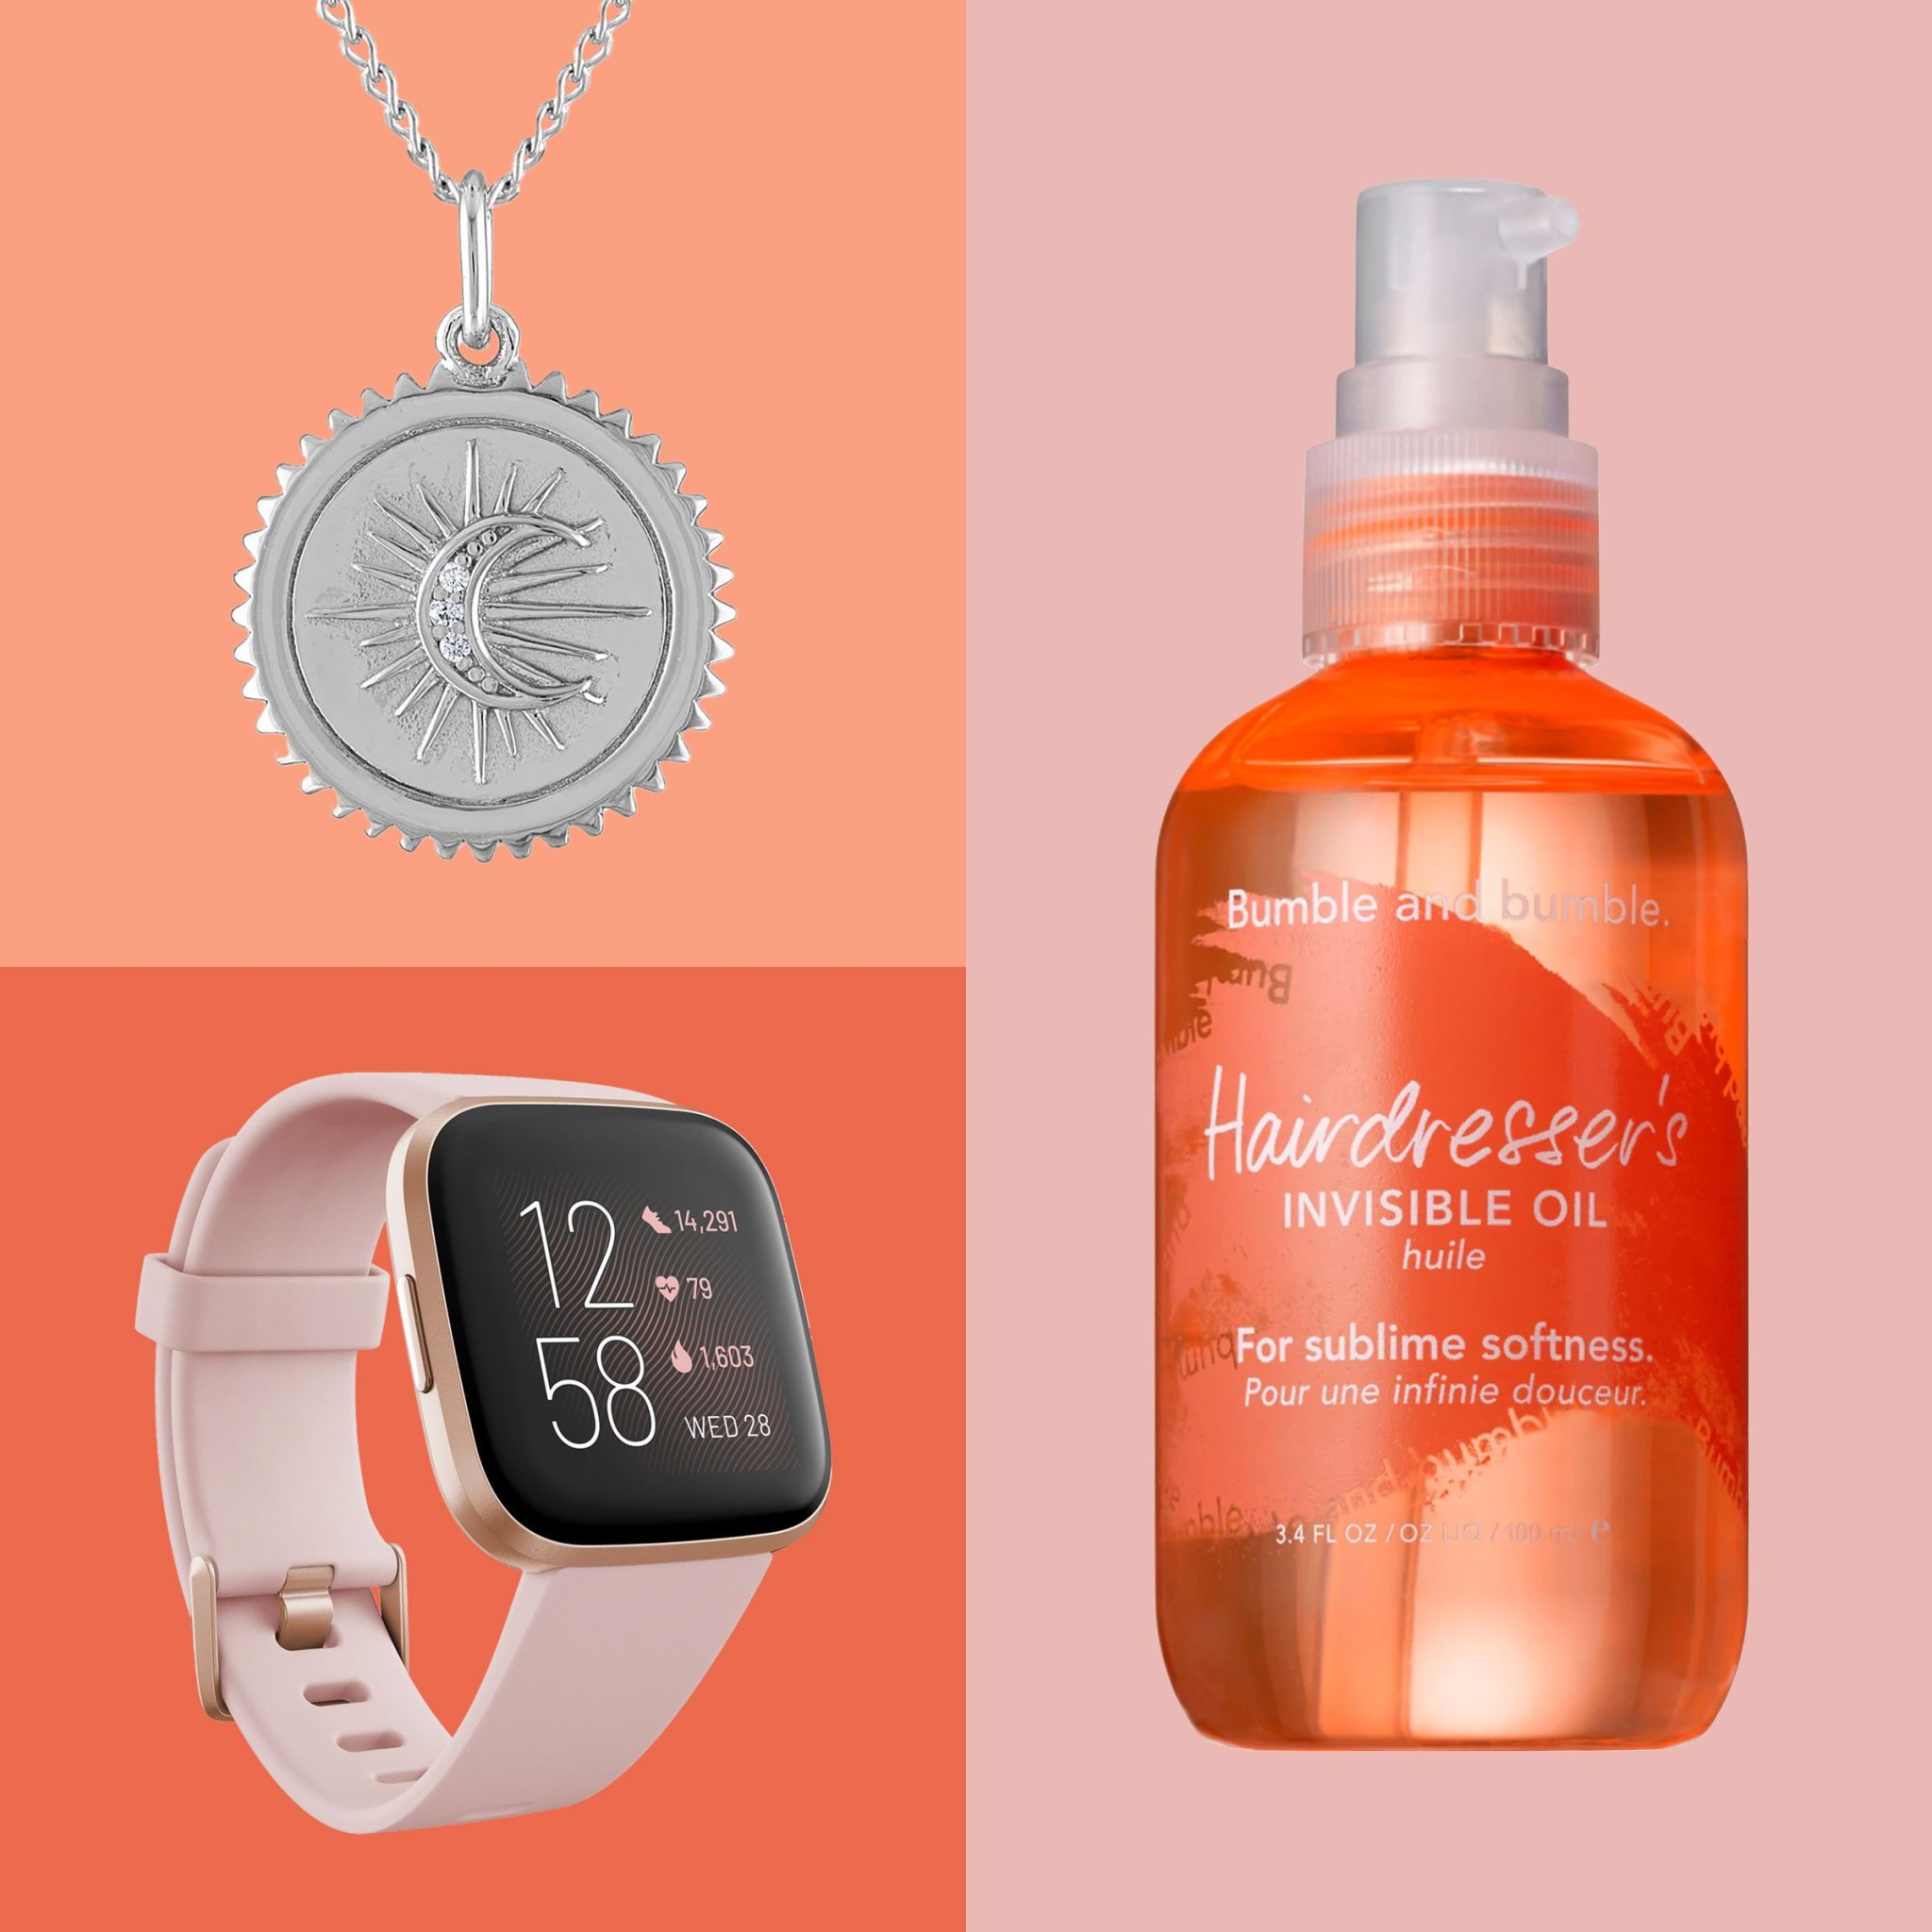 35 Great Gifts for Your Sister That She’s Guaranteed to Love